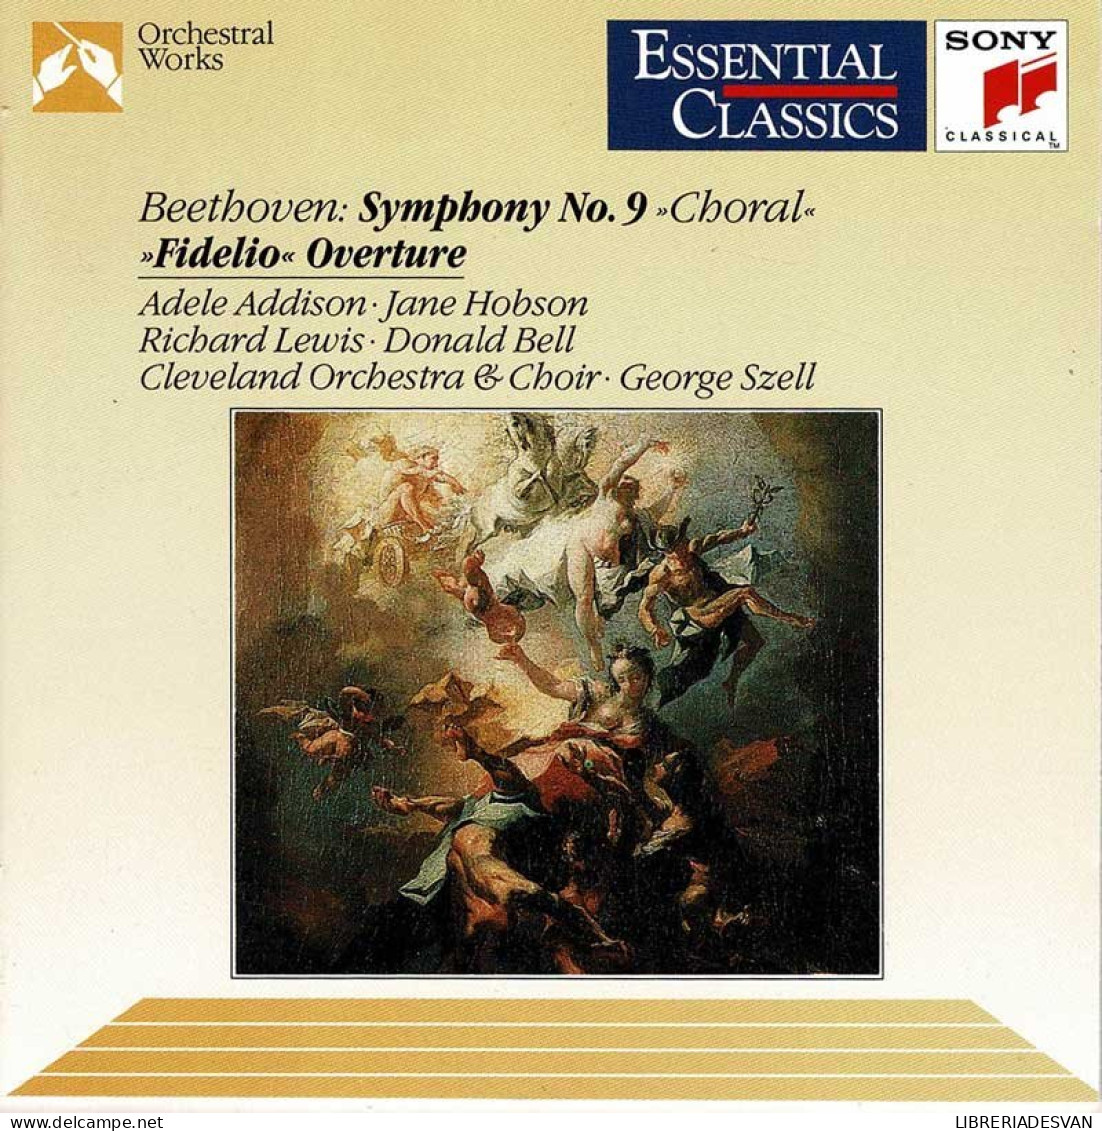 Beethoven - Symphony No. 9 Choral / Fidelio Overture. CD - Classical